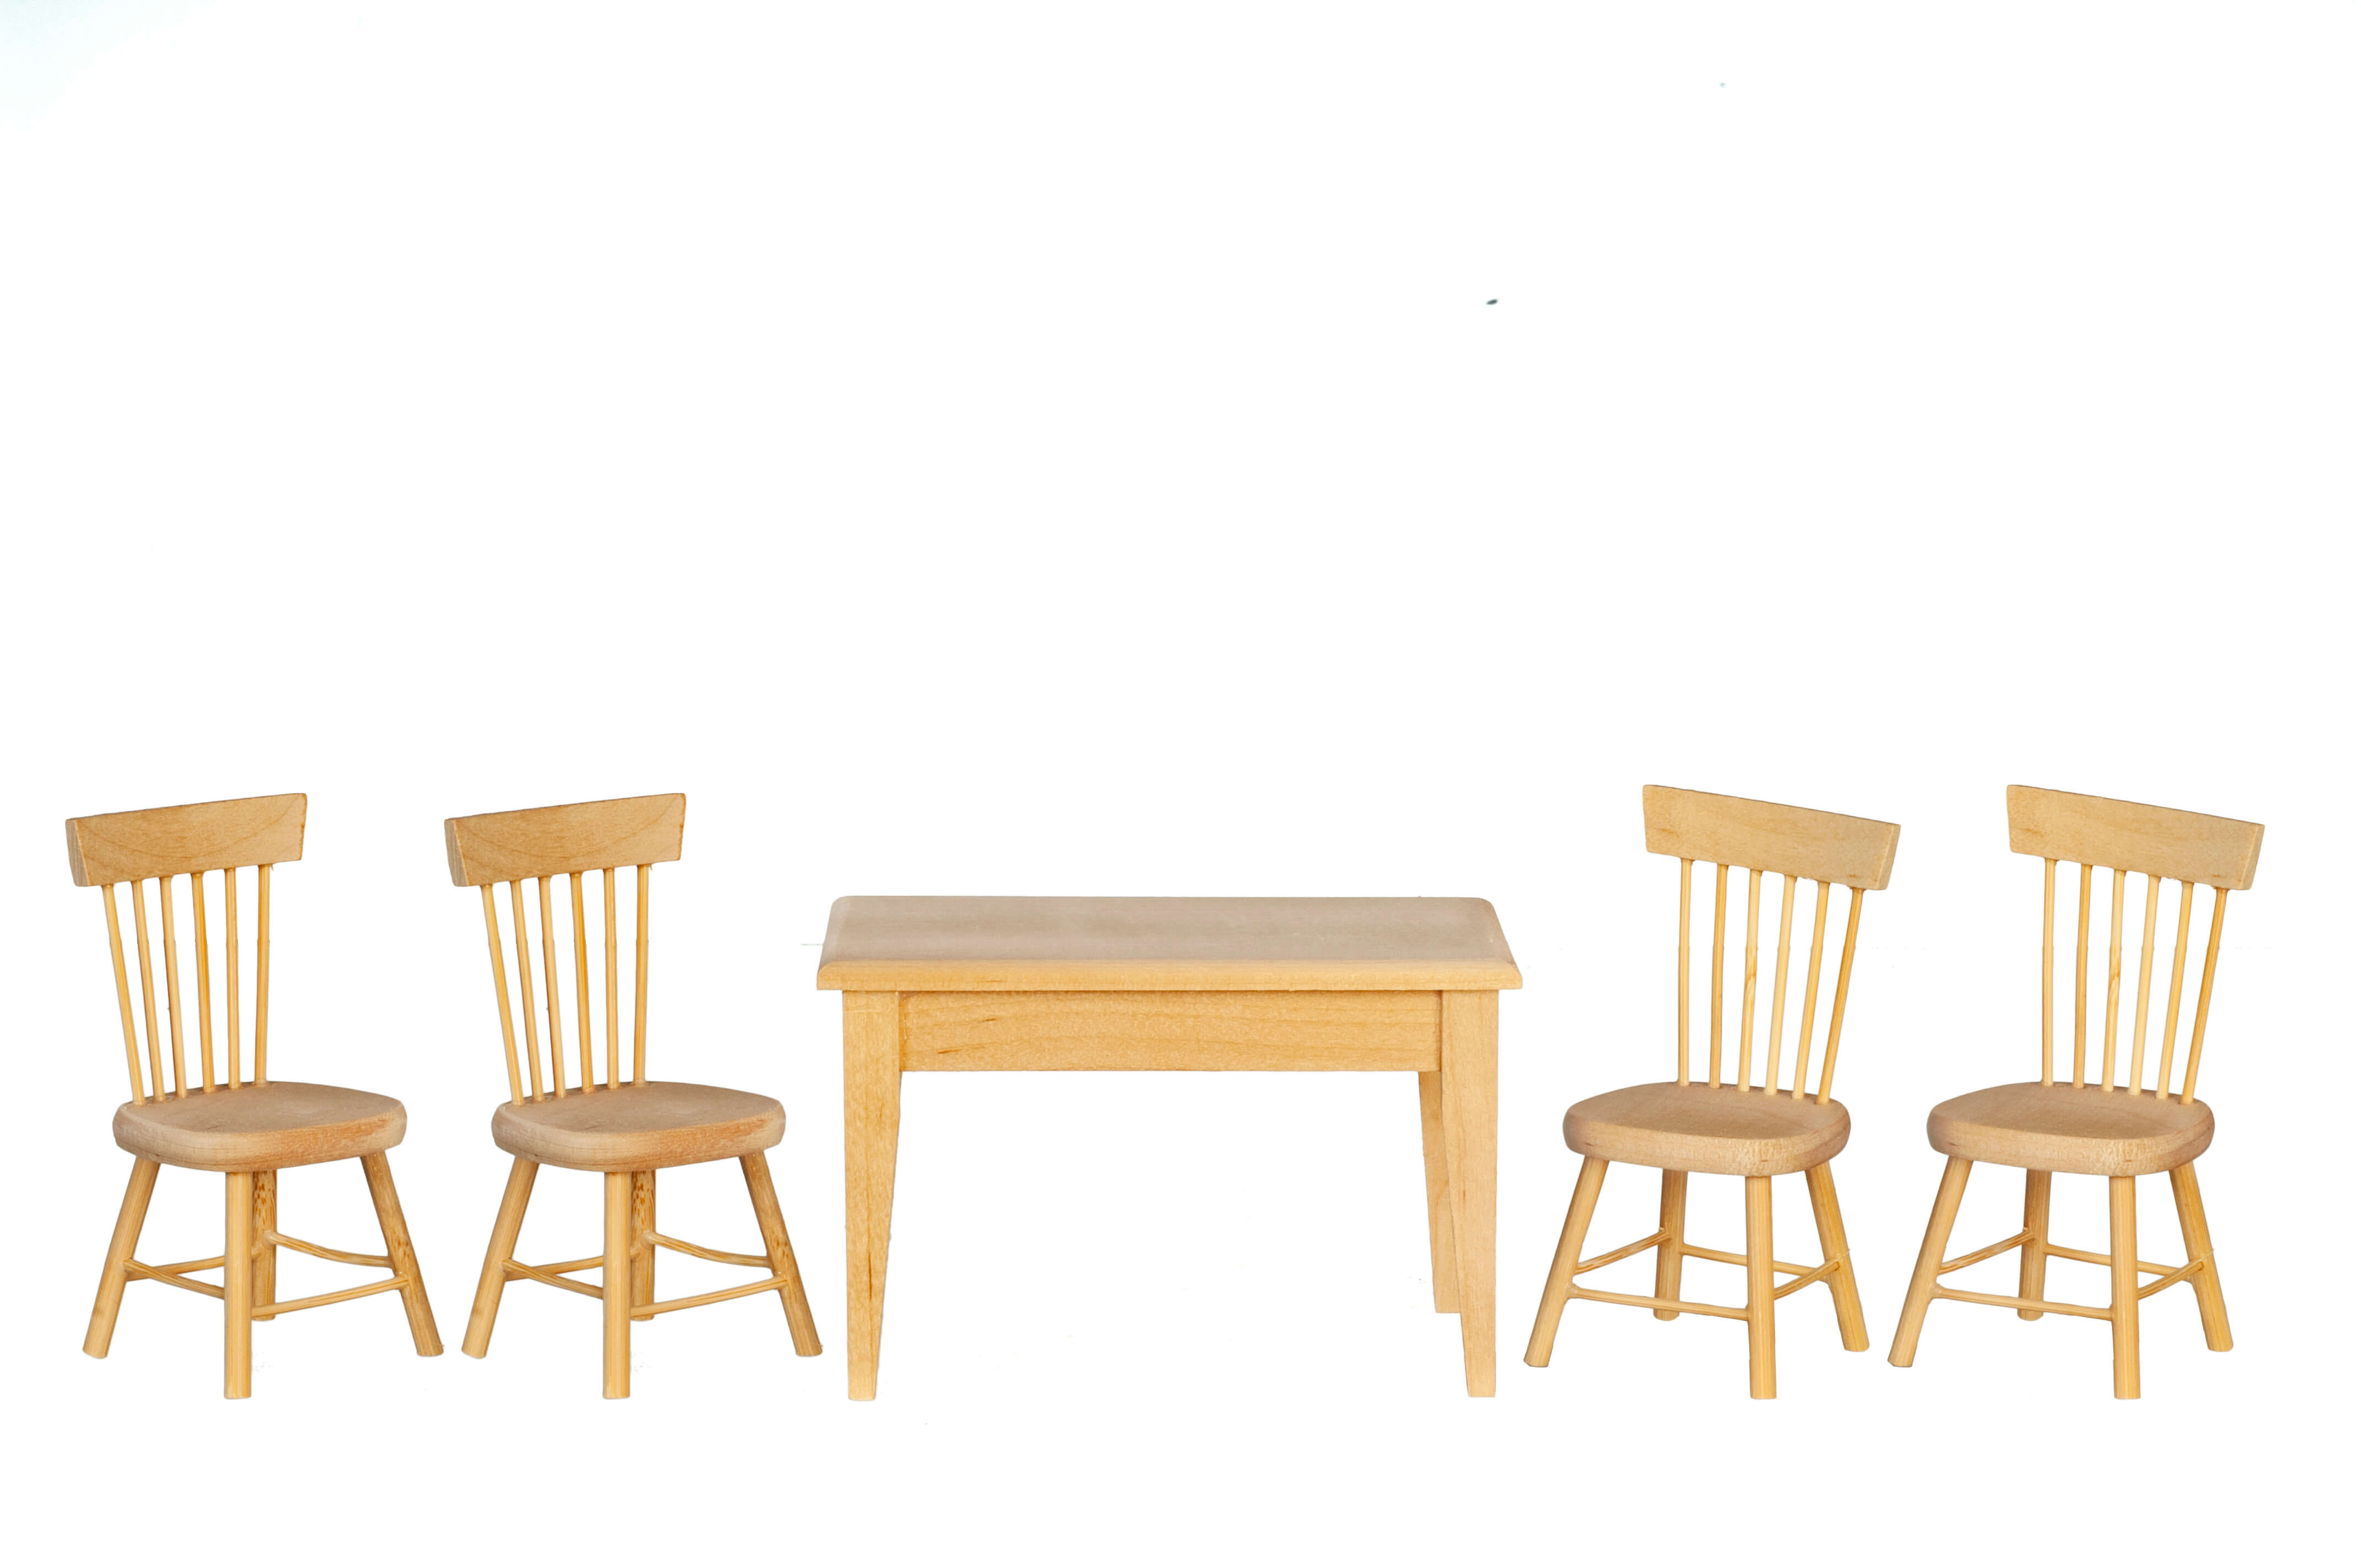 Rectangular Dining Table & Chairs - Unfinished - 5pc